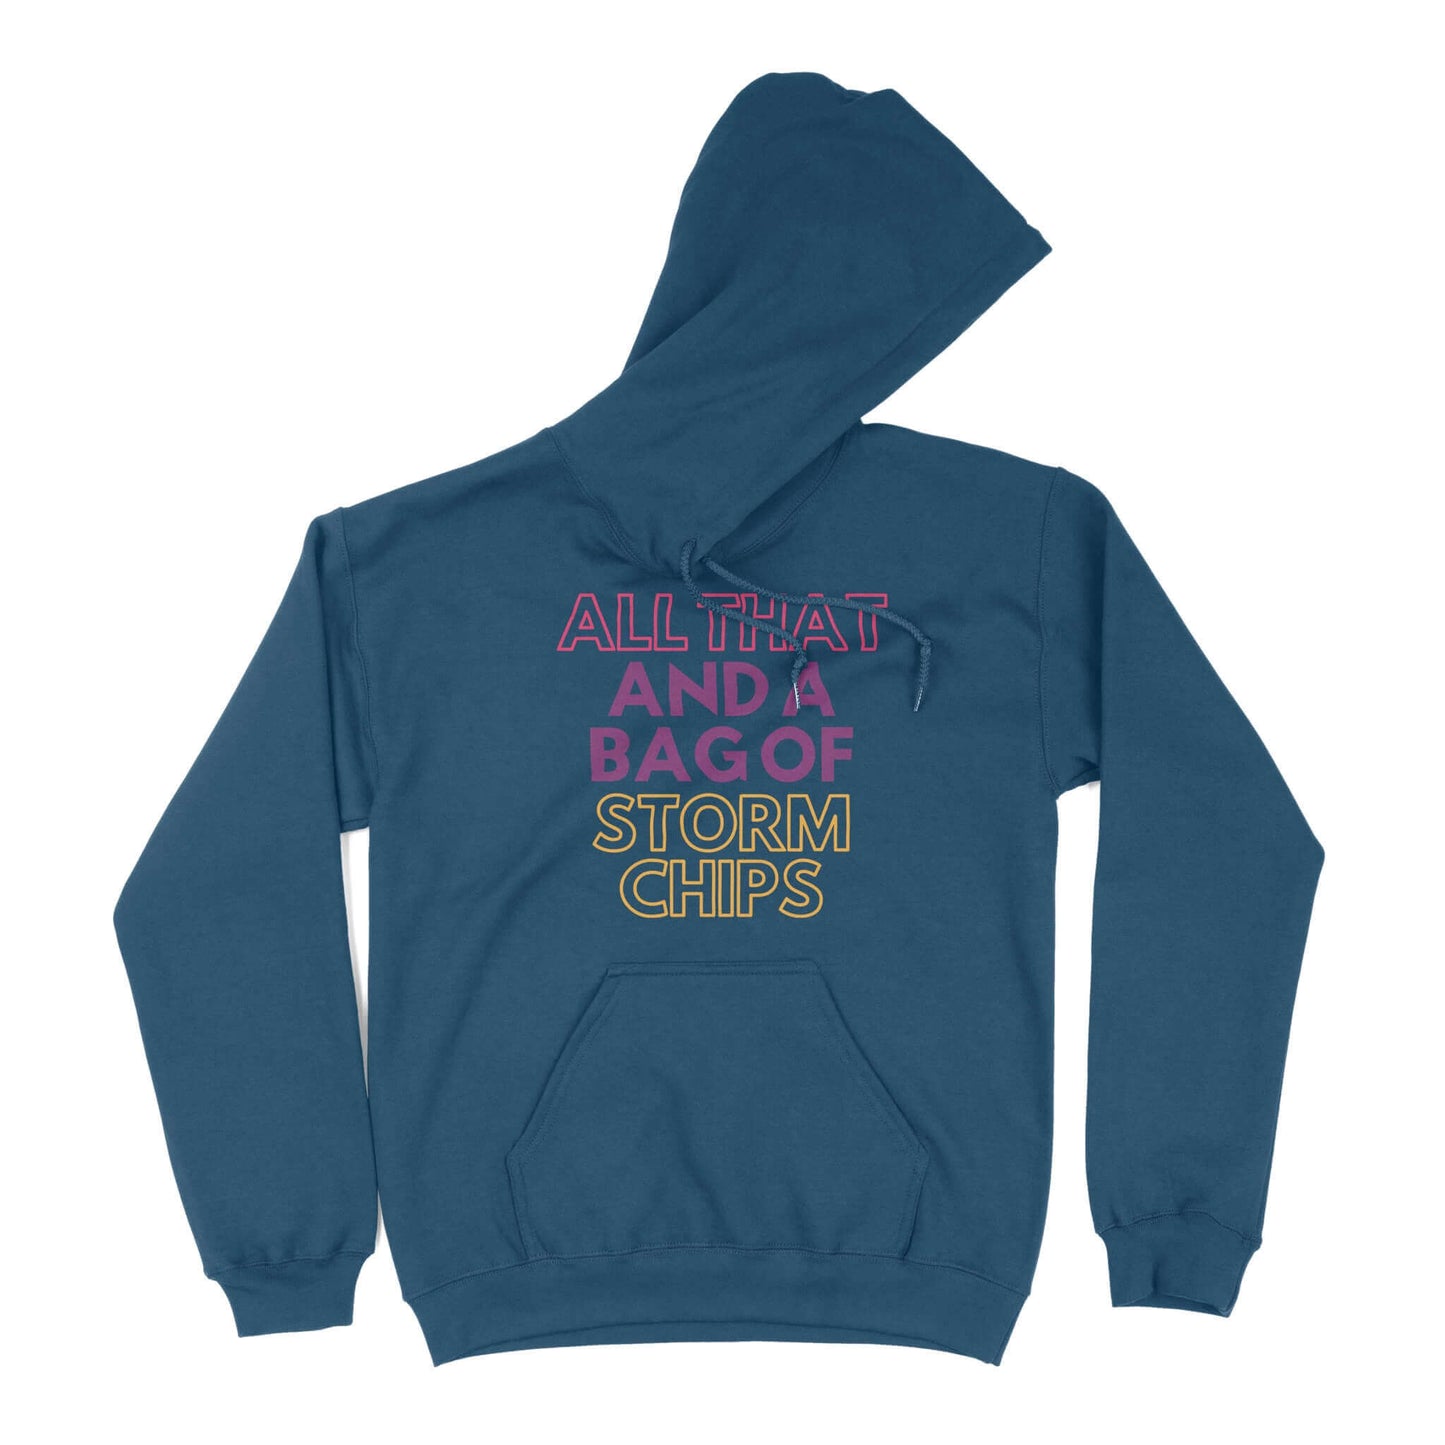 All That and a Bag of Storm Chips Unisex Hoodie in Color: Indigo Blue - East Coast AF Apparel